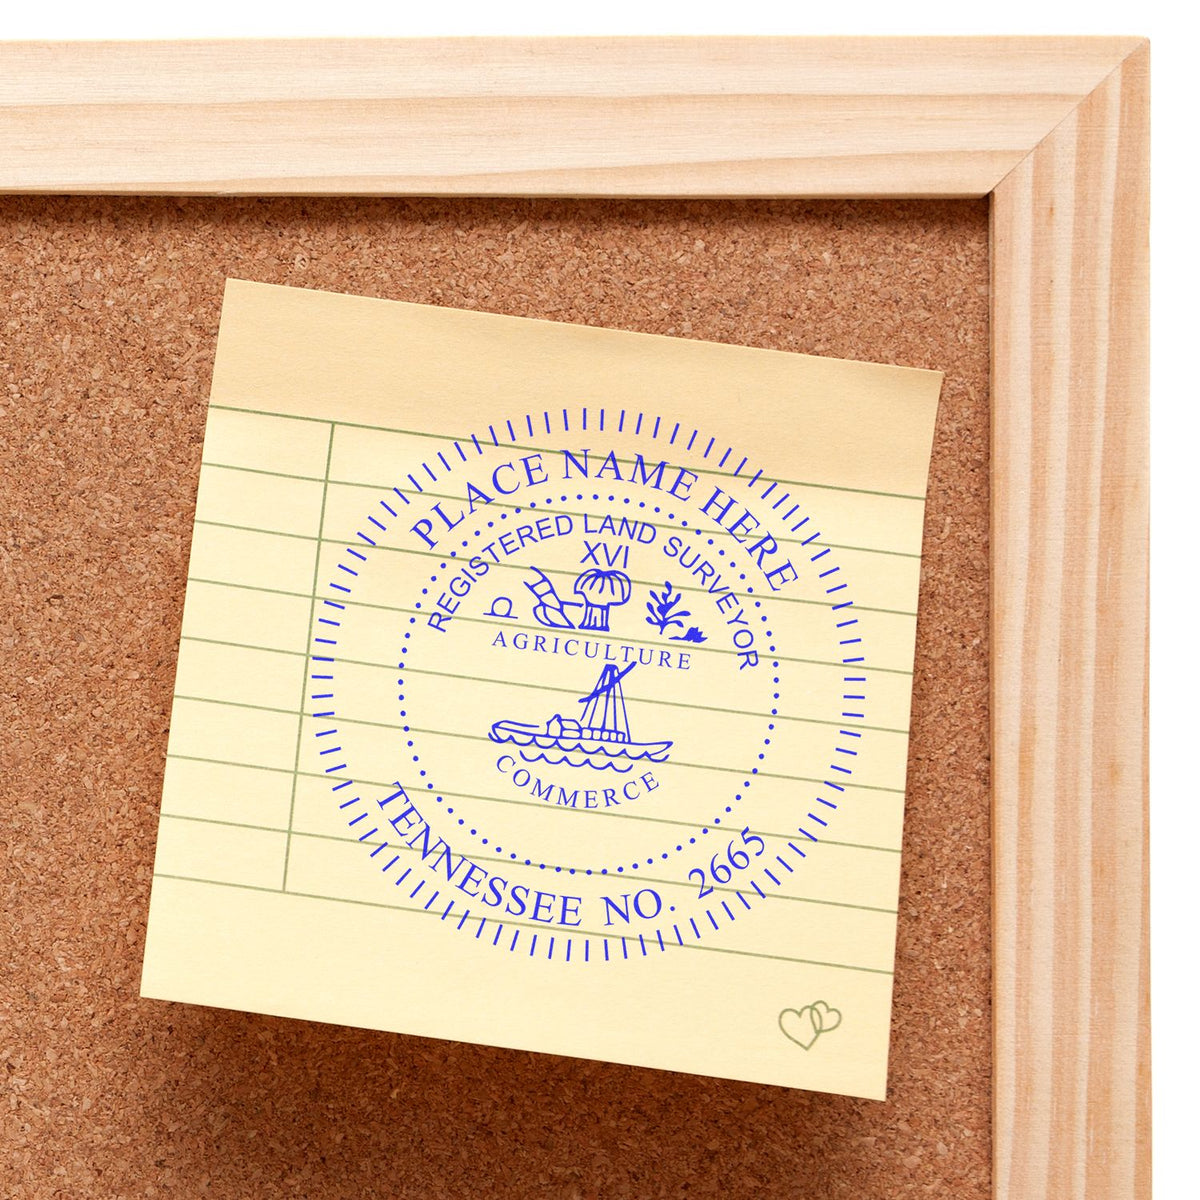 A lifestyle photo showing a stamped image of the Slim Pre-Inked Tennessee Land Surveyor Seal Stamp on a piece of paper